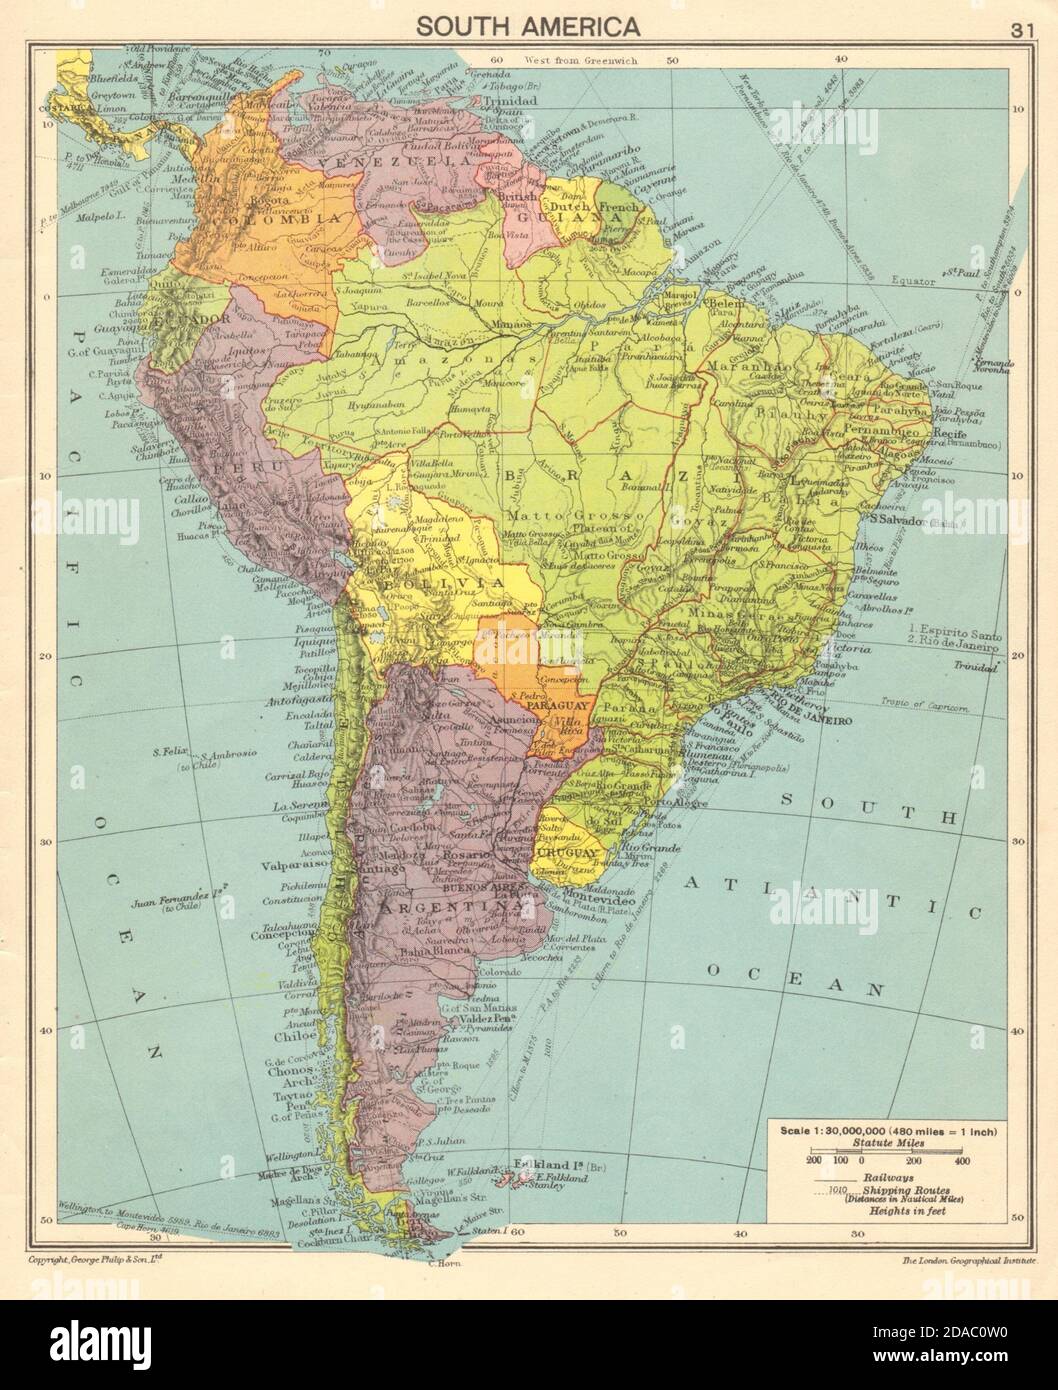 South America. Second World War 1943 old vintage map plan chart Stock Photo